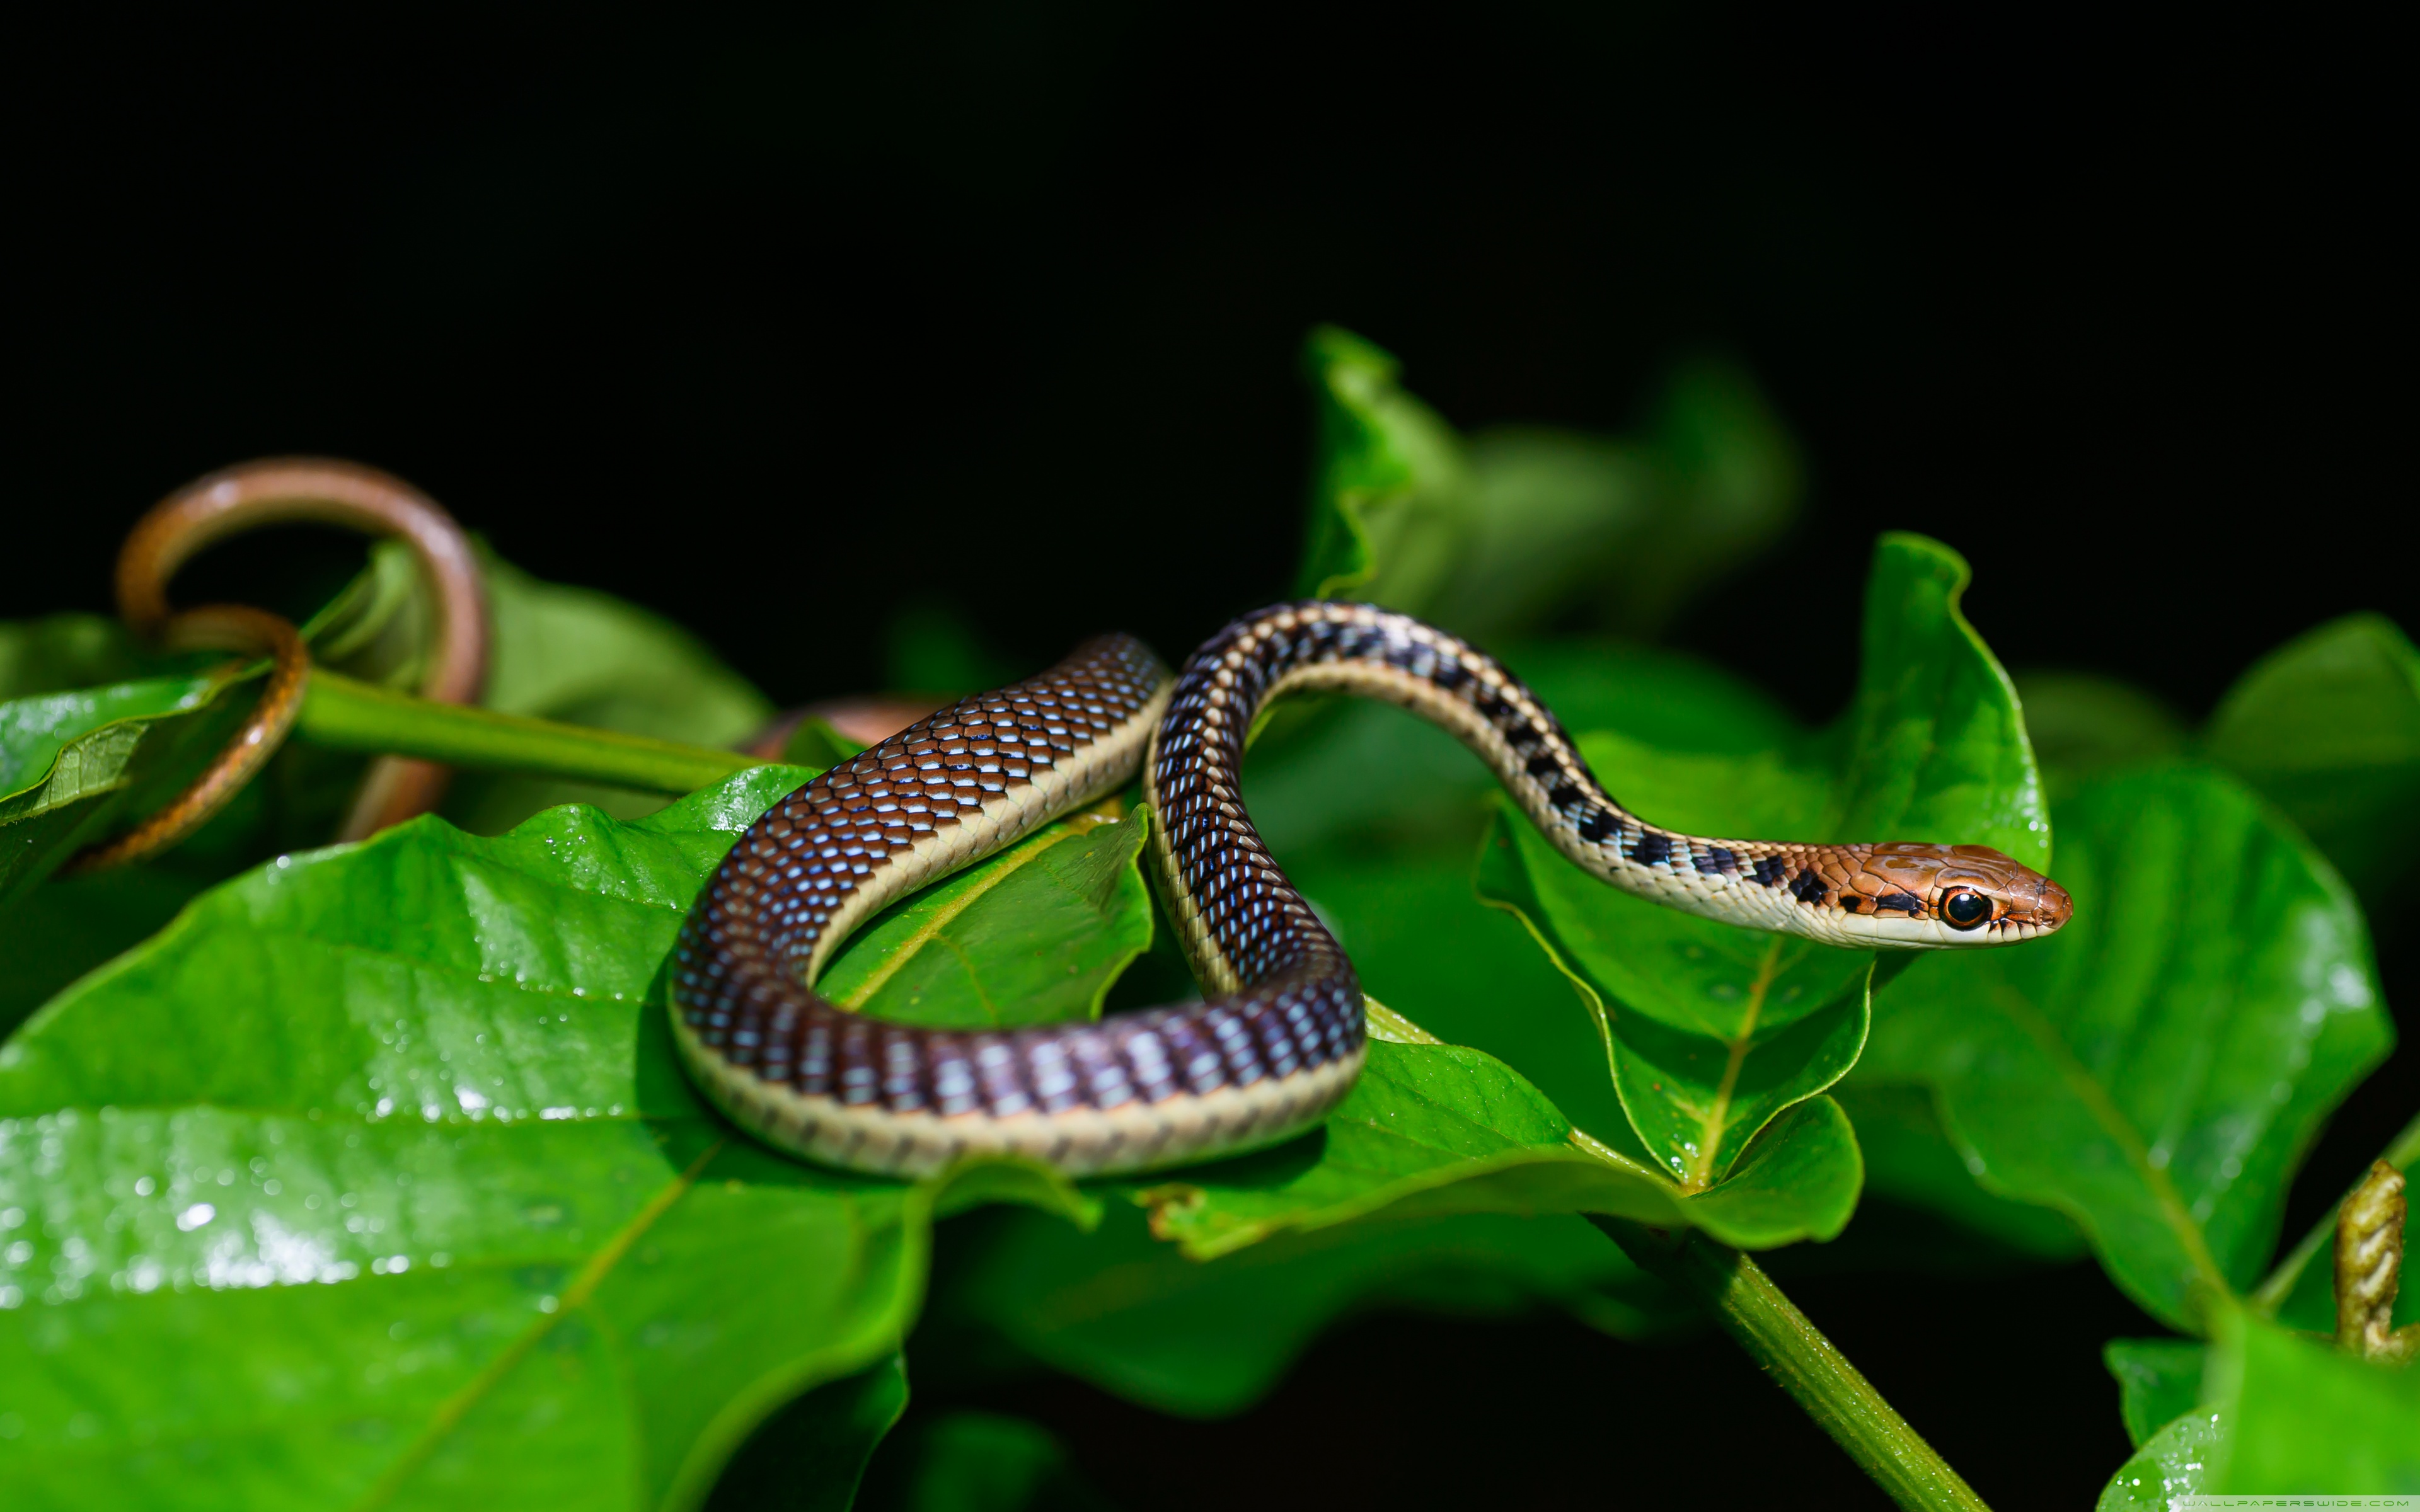  Small Snake  Wallpapers Wallpaper Cave